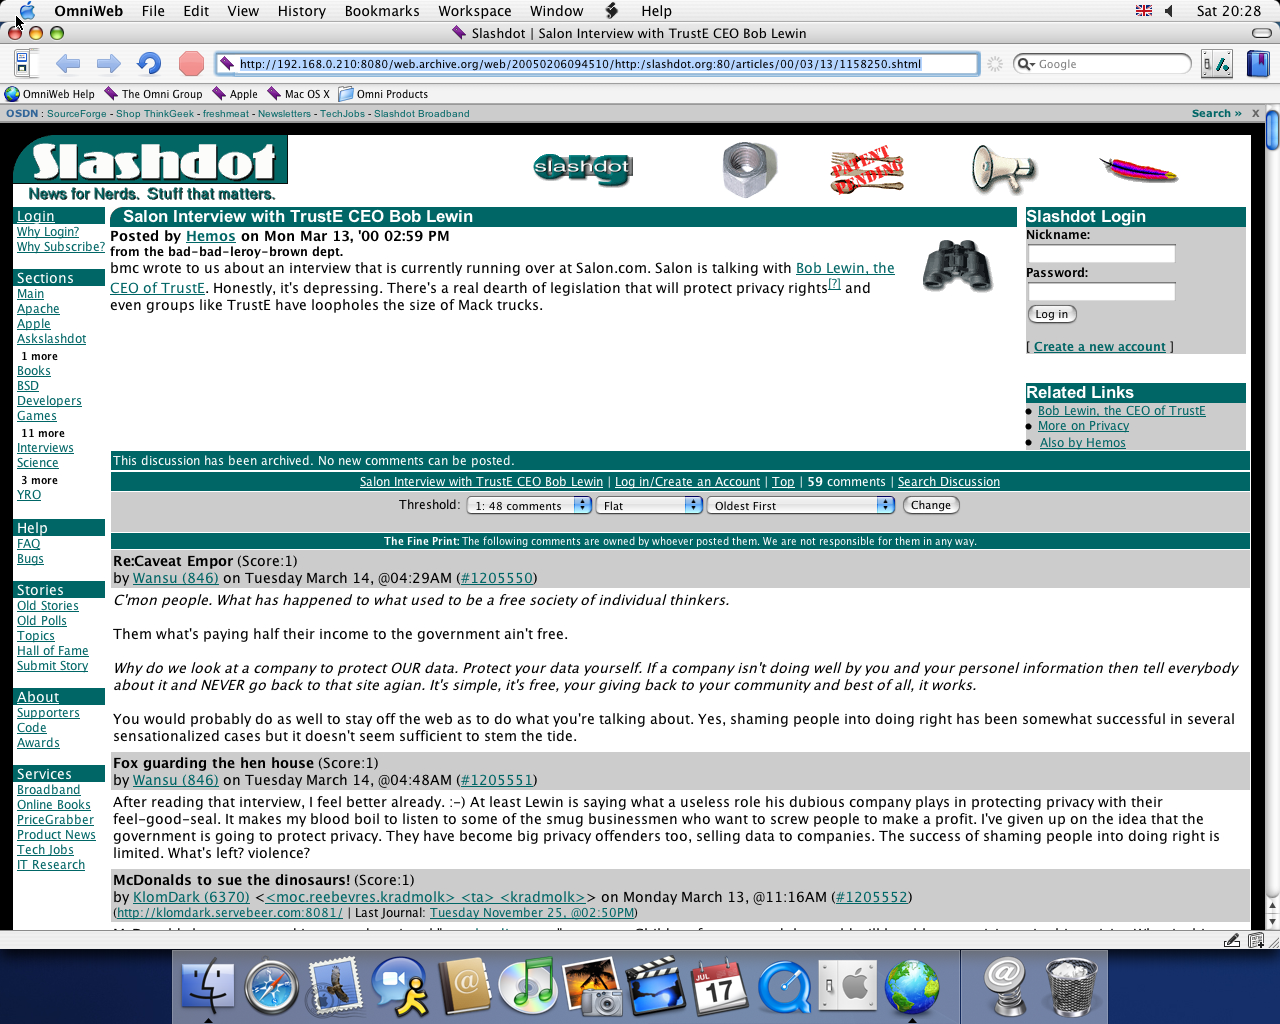 OS X 10.3 PPC with Omniweb 5.0 displaying a page from Slashdot archived at February 06, 2005 at 09:45:10